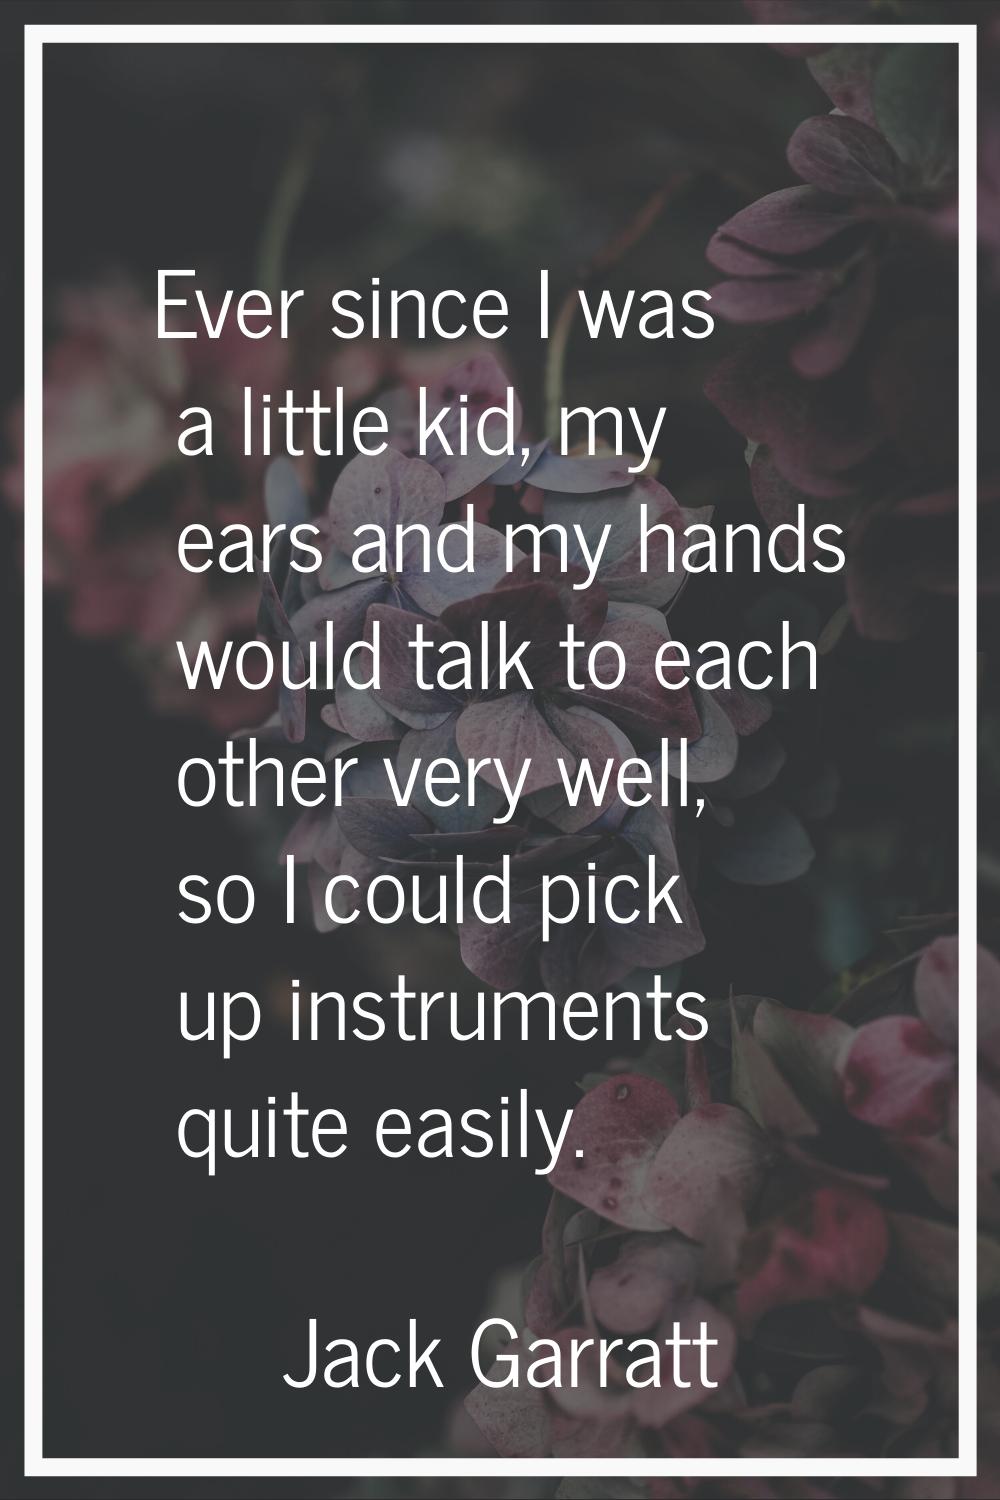 Ever since I was a little kid, my ears and my hands would talk to each other very well, so I could 